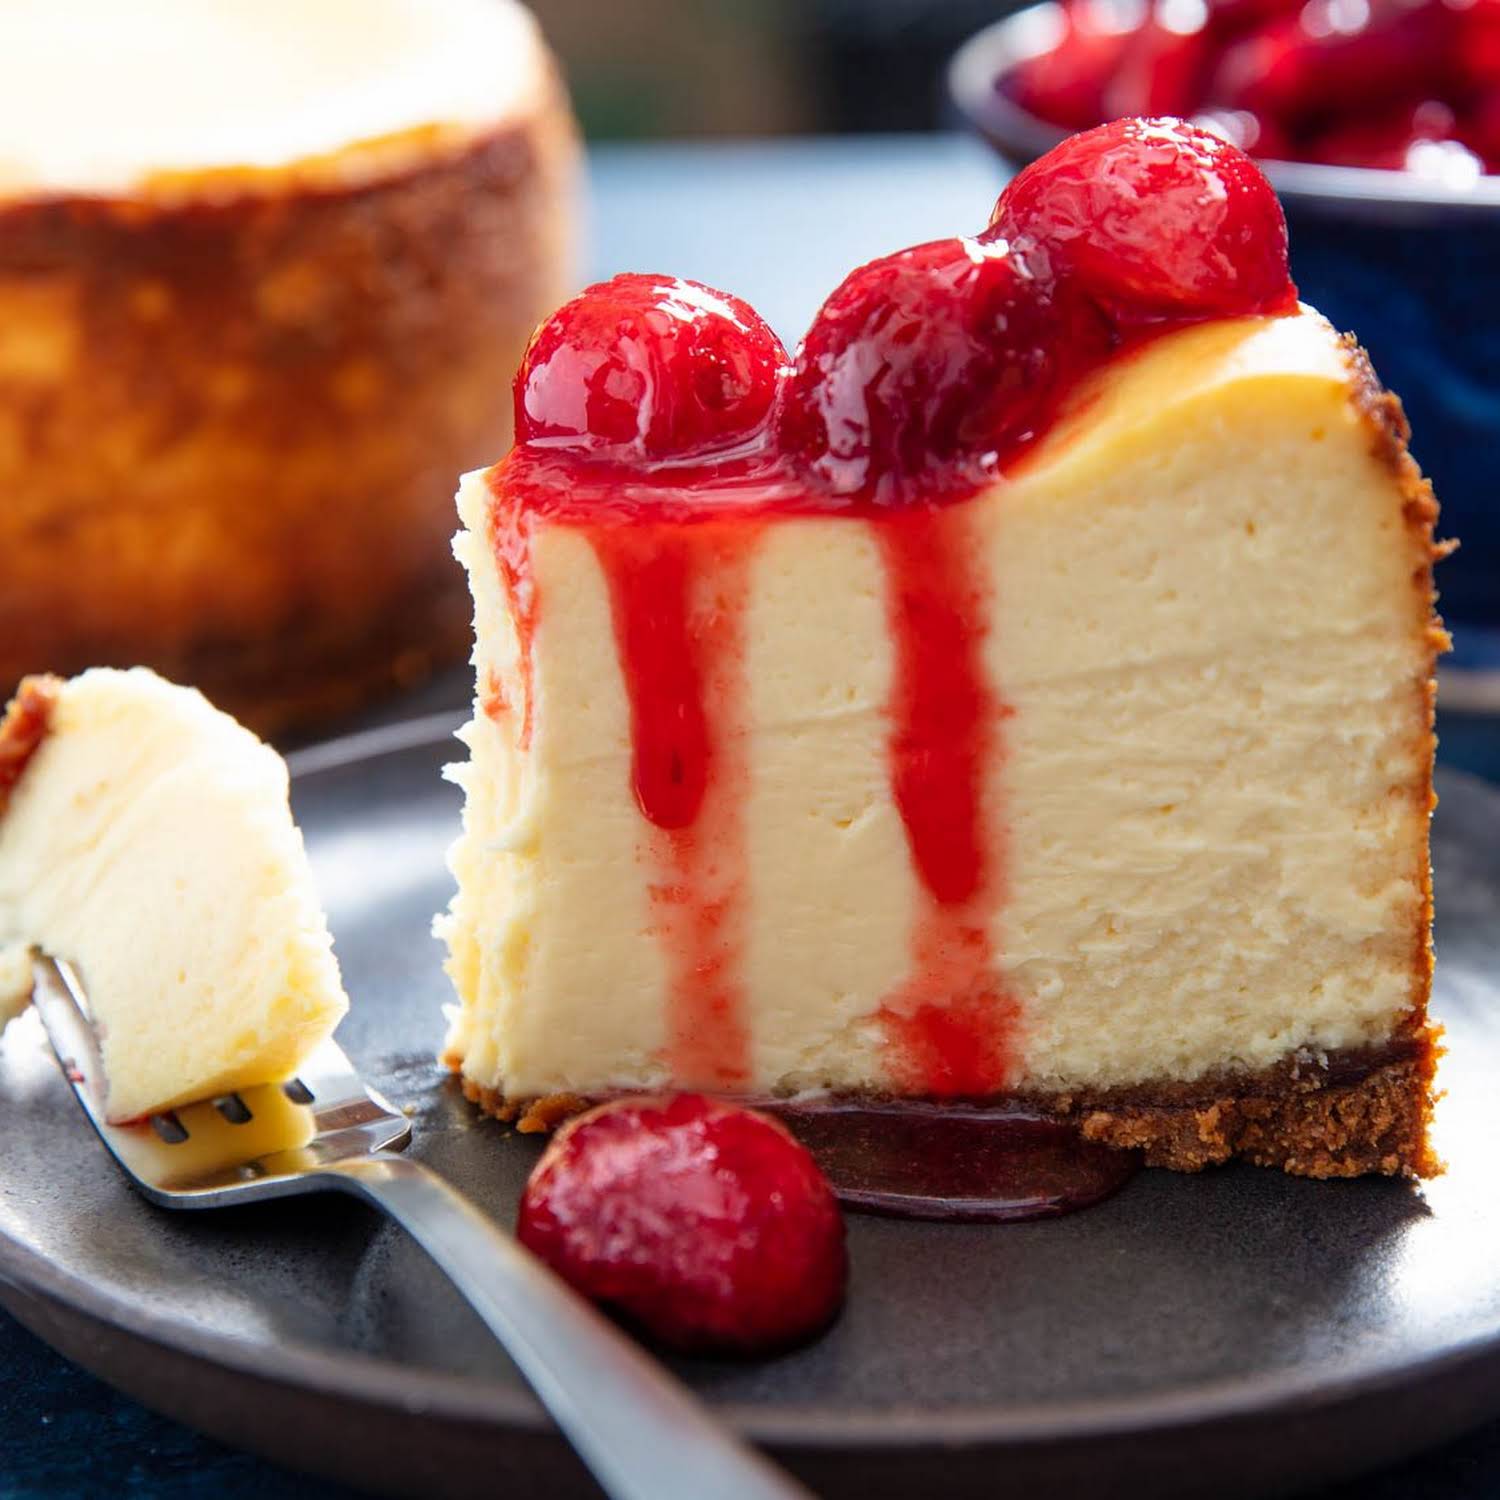 Classic New York Cheesecake Recipe Without Sour Cream